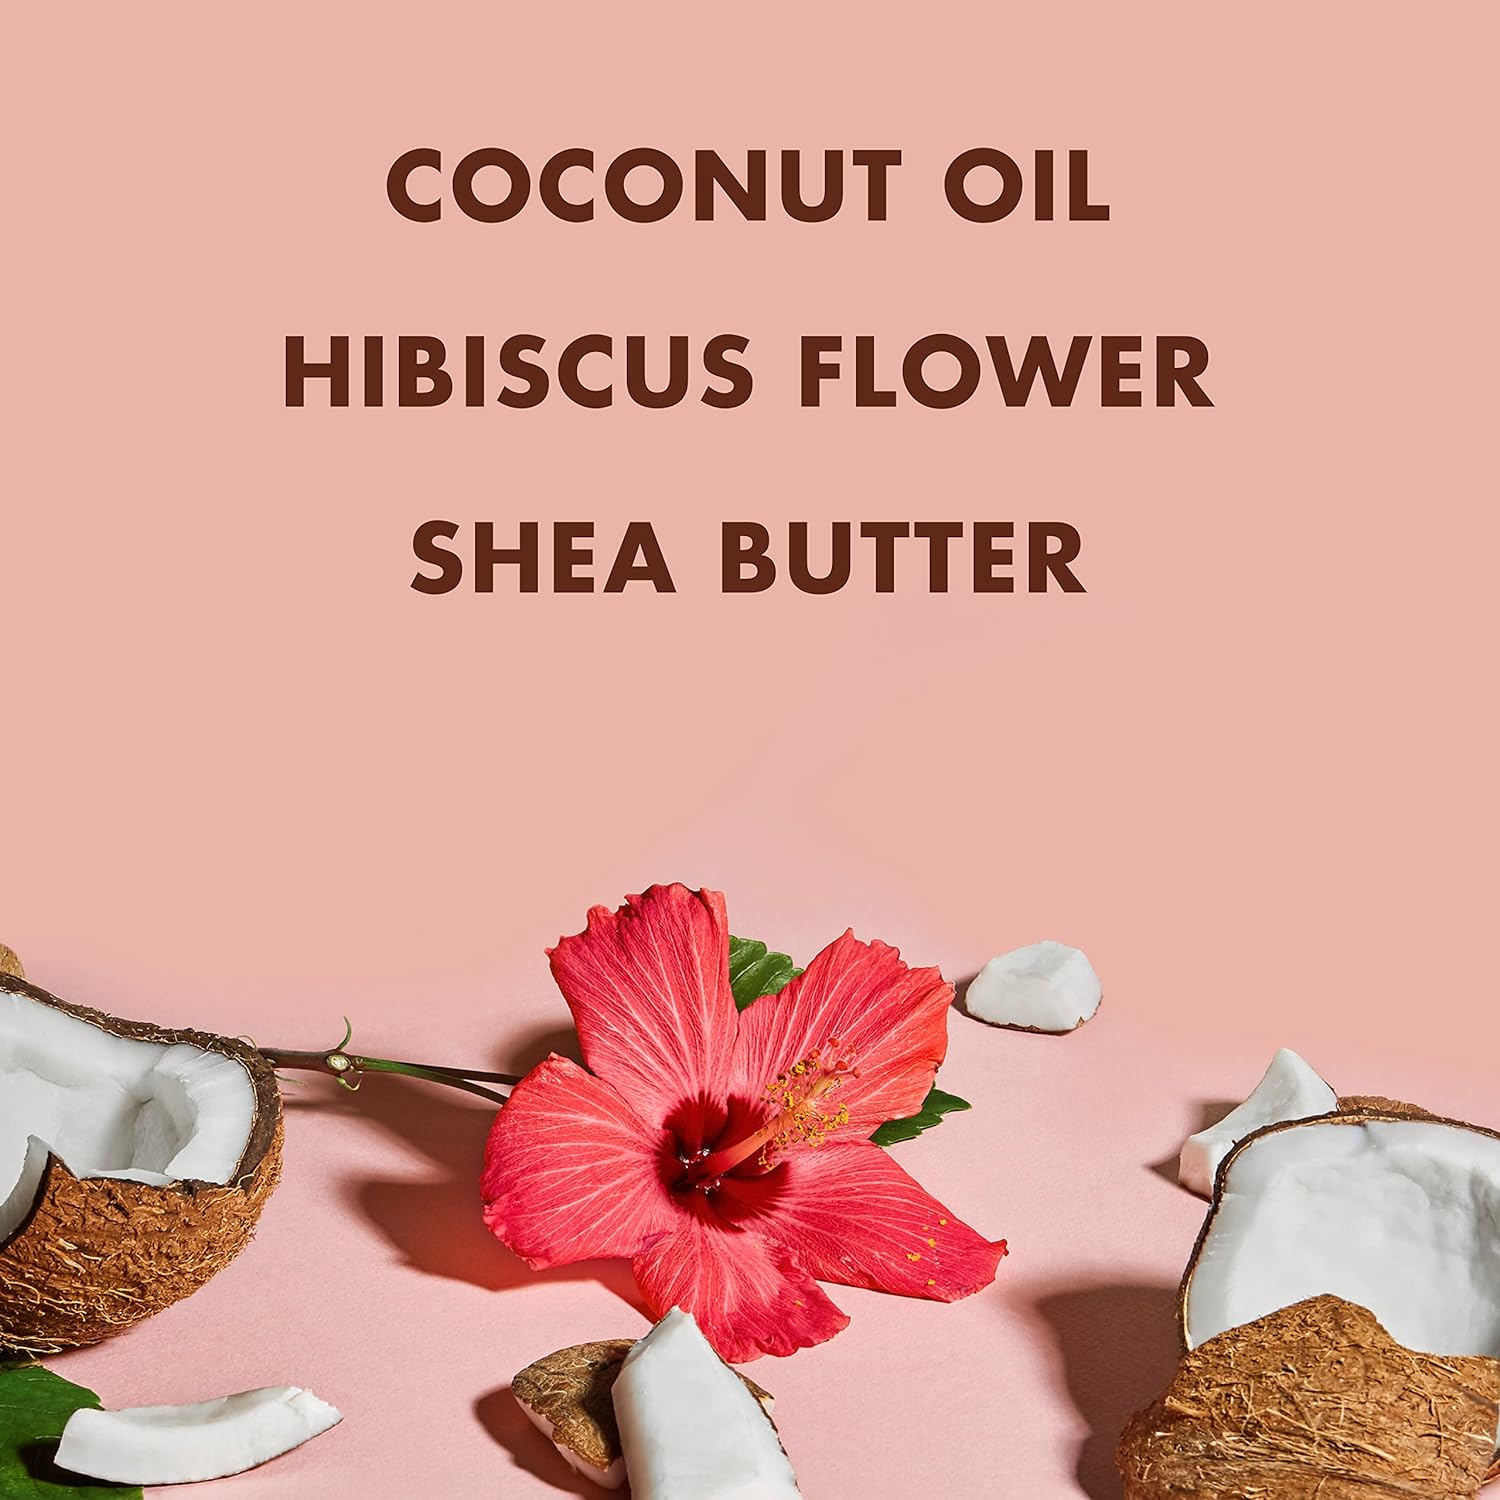 SheaMoisture Curl & Shine Conditioner Coconut & Hibiscus, for Thick, Curly Hair, to Moisturize & Soften, 24 oz : Beauty & Personal Care